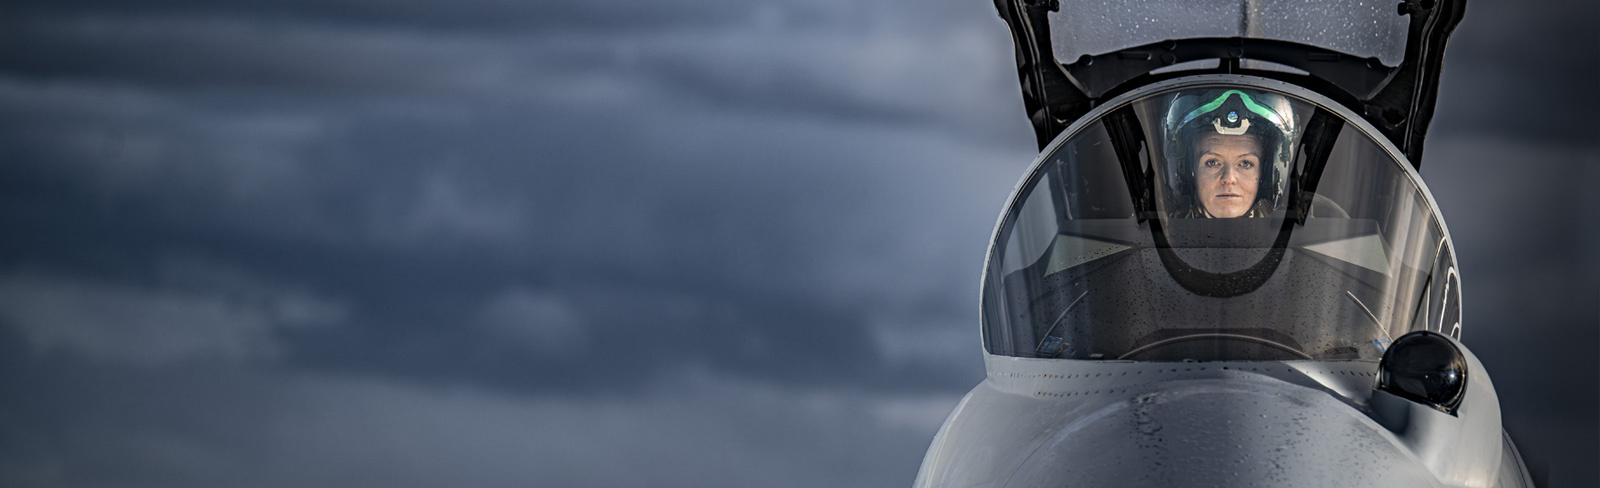 The UK Ministry of Defence (MOD) has awarded BAE Systems a contract to develop its Striker II Helmet Mounted Display (HMD) for the Royal Air Force (RAF) Typhoon fleet.